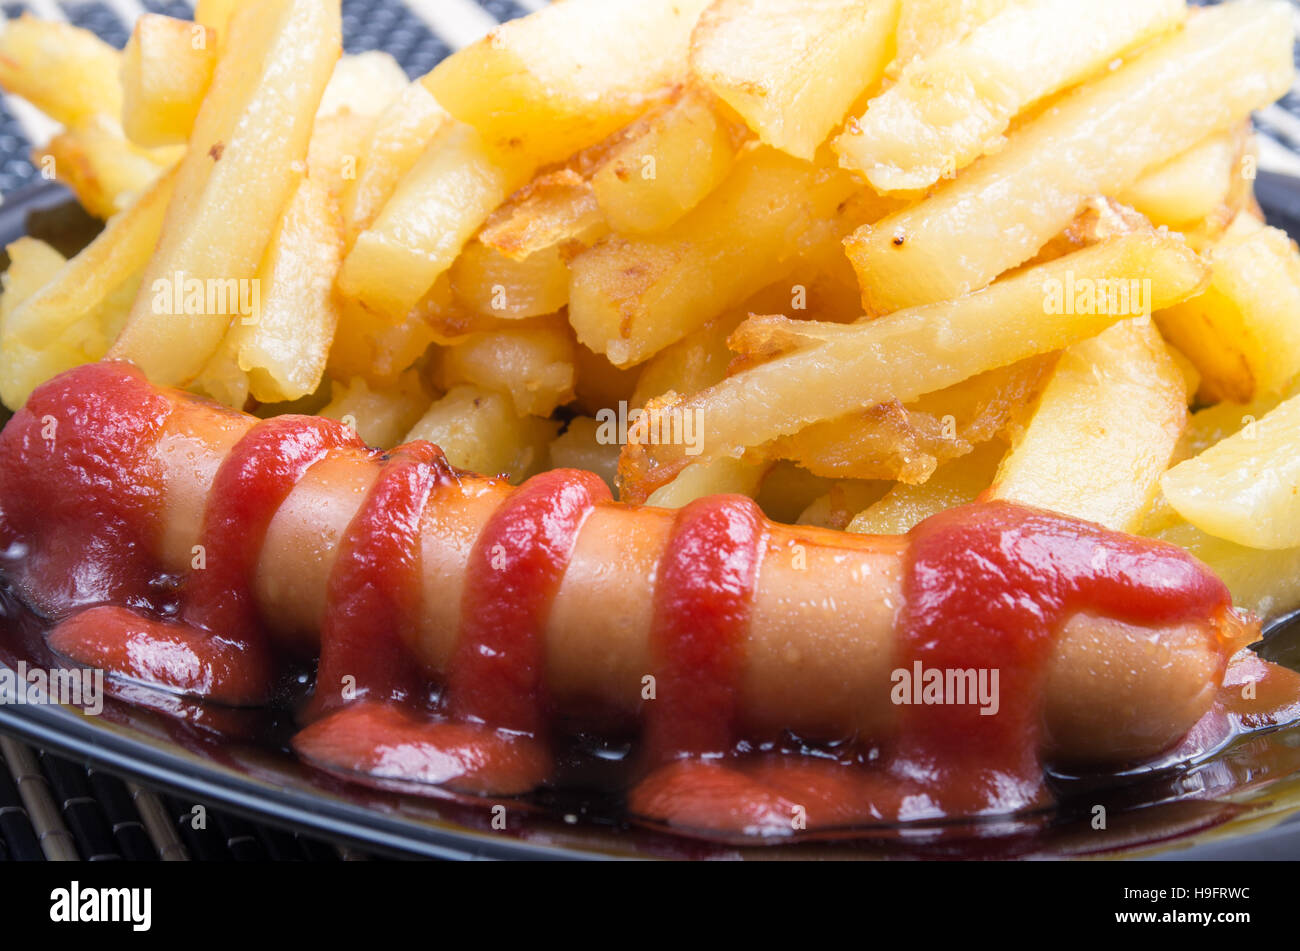 Hot fried sausage decorated with tomato ketchup on a plate next to the fries closeup Stock Photo